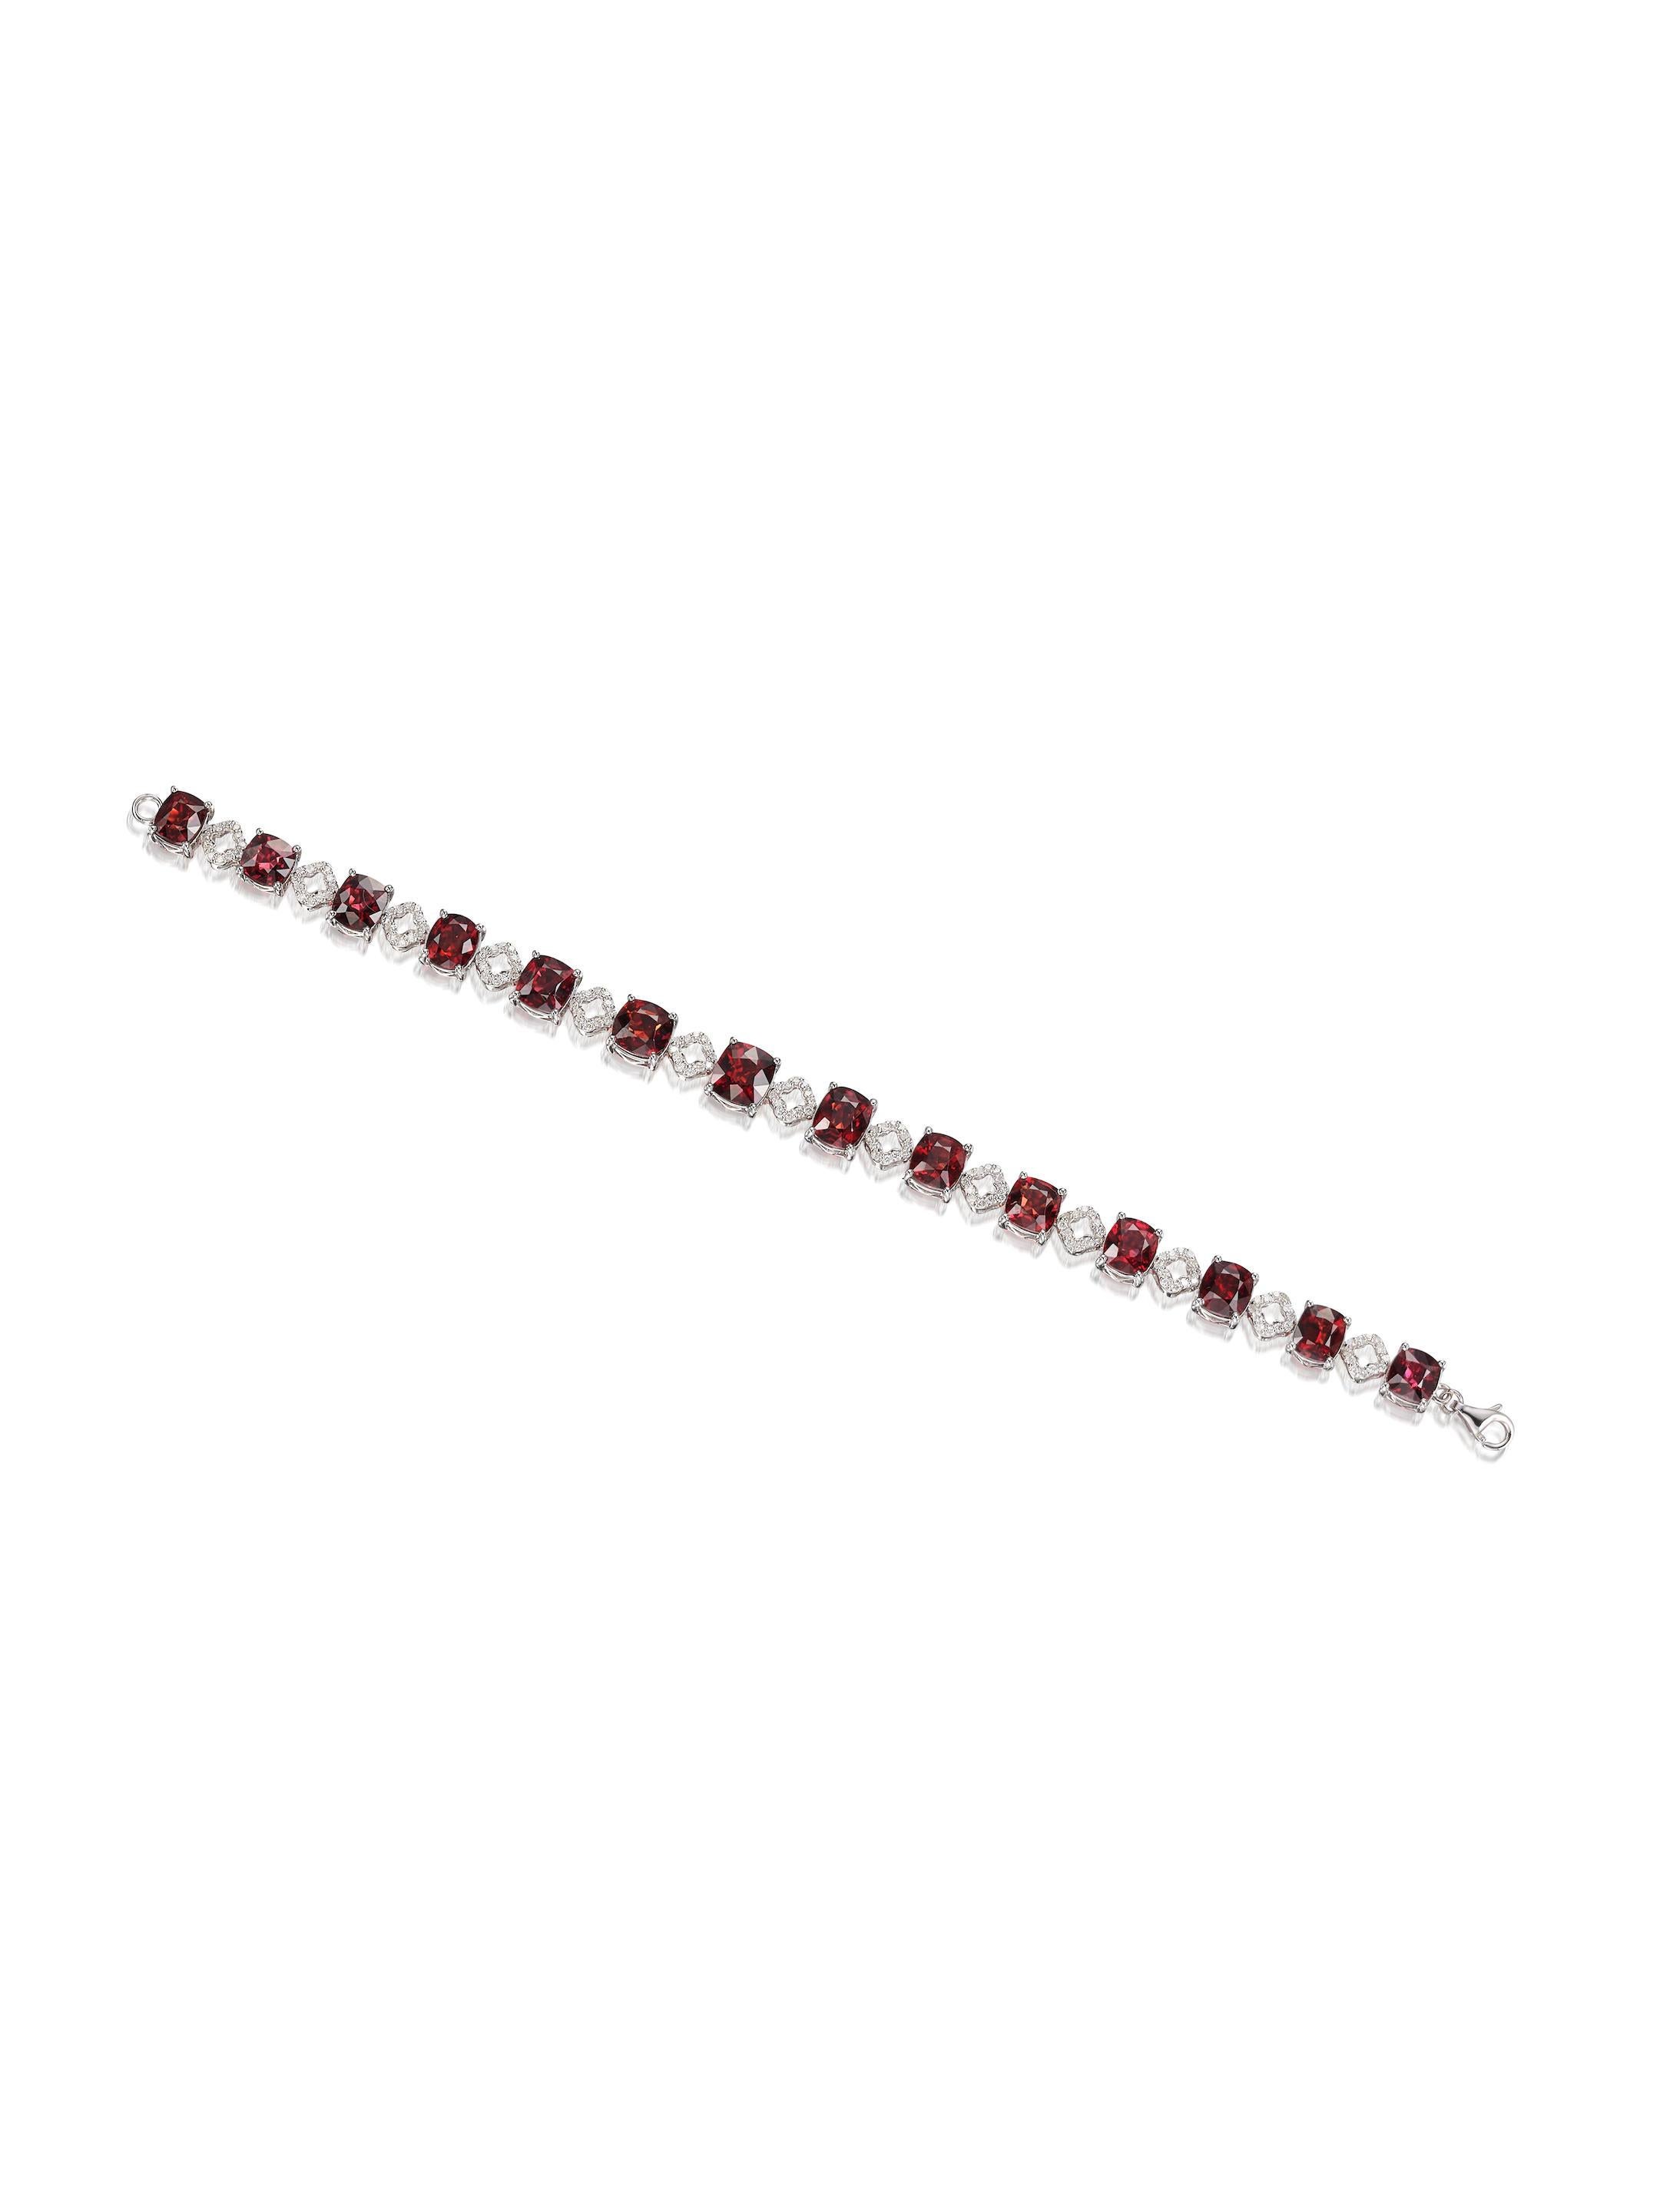 While many people associate the diamond with love, the truth is that the red spinel is the true stone of love. The stone is believed to help people put their egos aside and become devoted to one another. The red colour of the stone is also